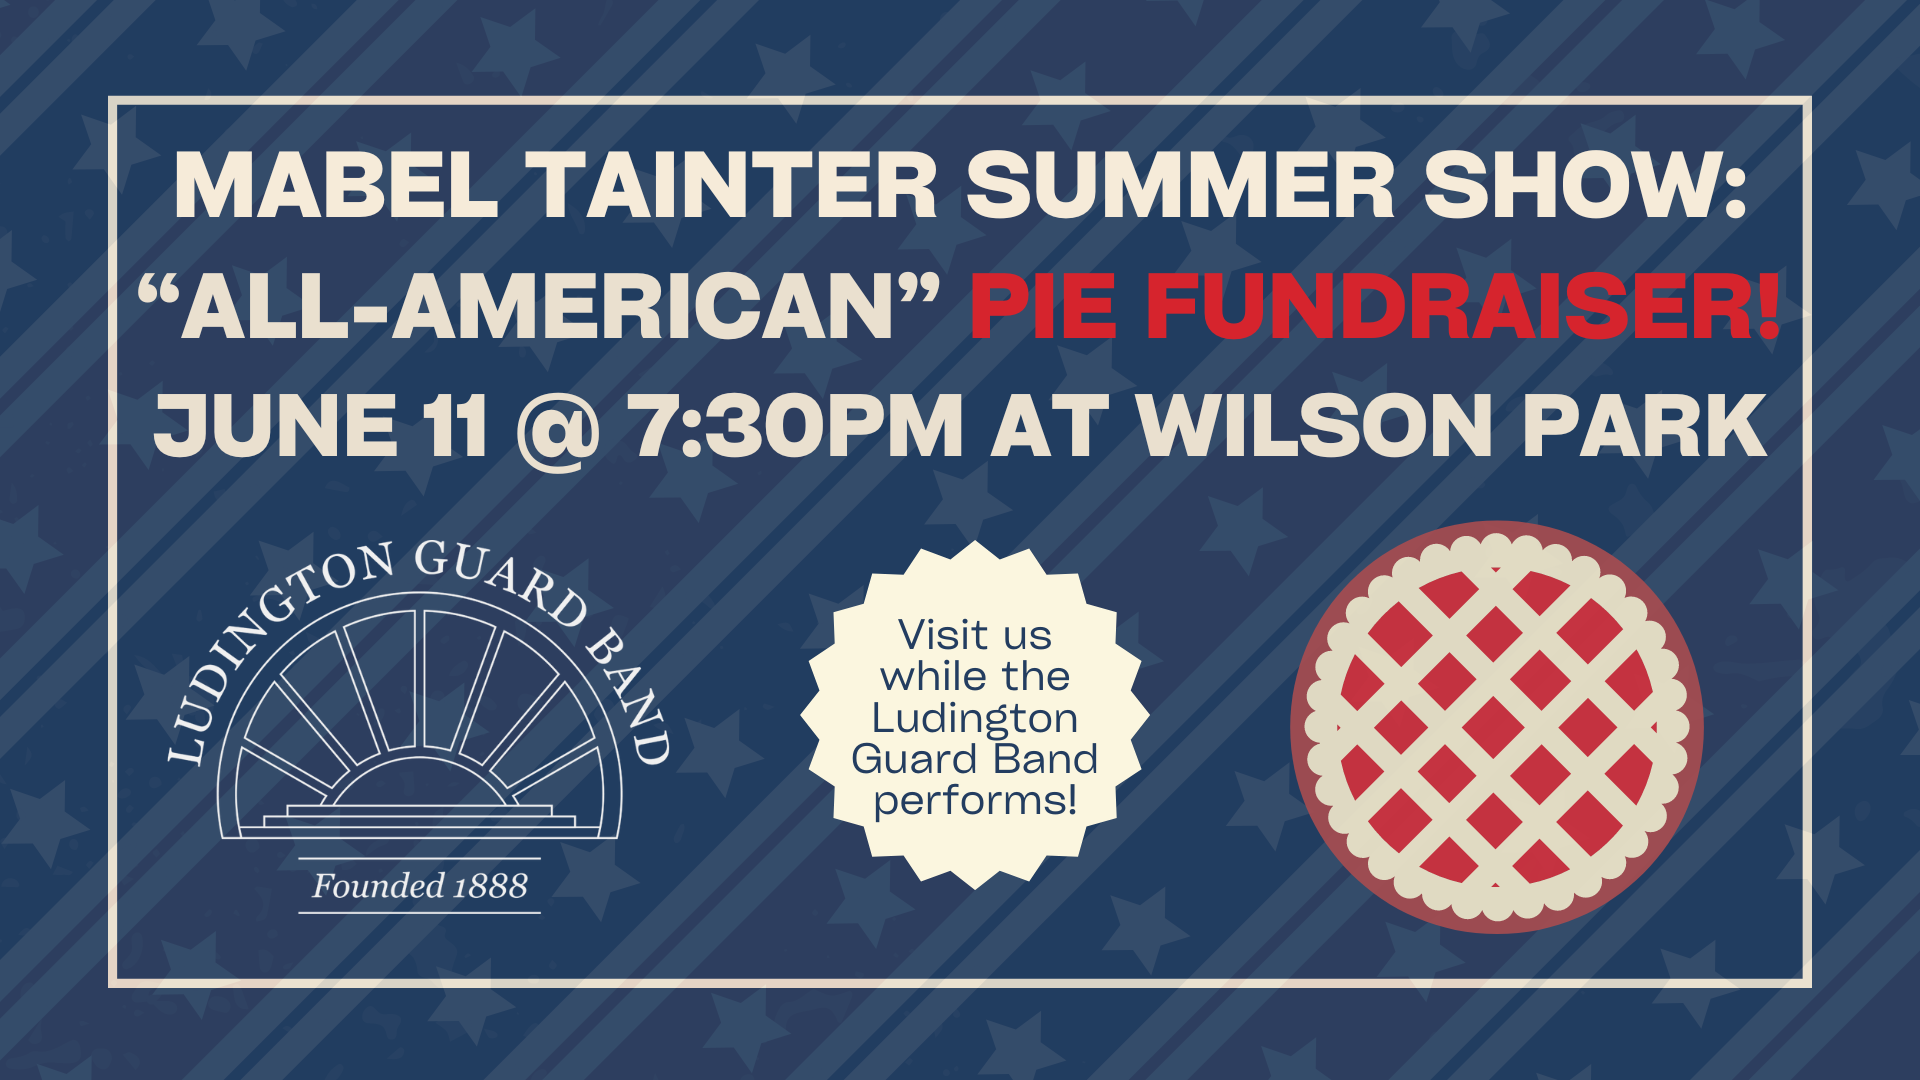 Mabel Tainter's Summer Show: "All-American" Pie Fundraiser!